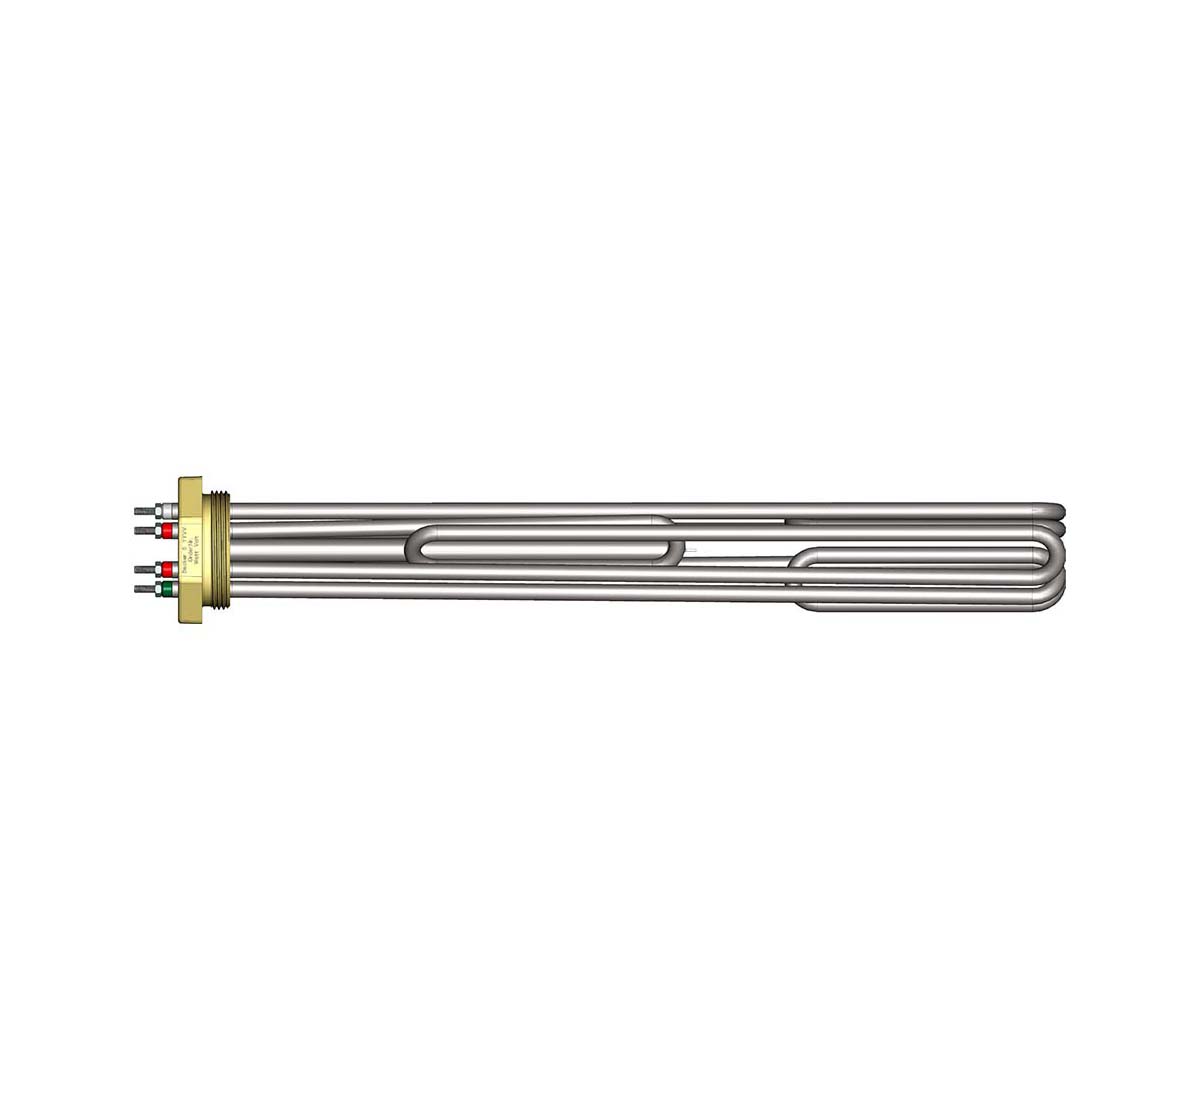 A picture of a Backer immersion heaters for hydraulic oil heating with element tubes in acidproof stainless steel